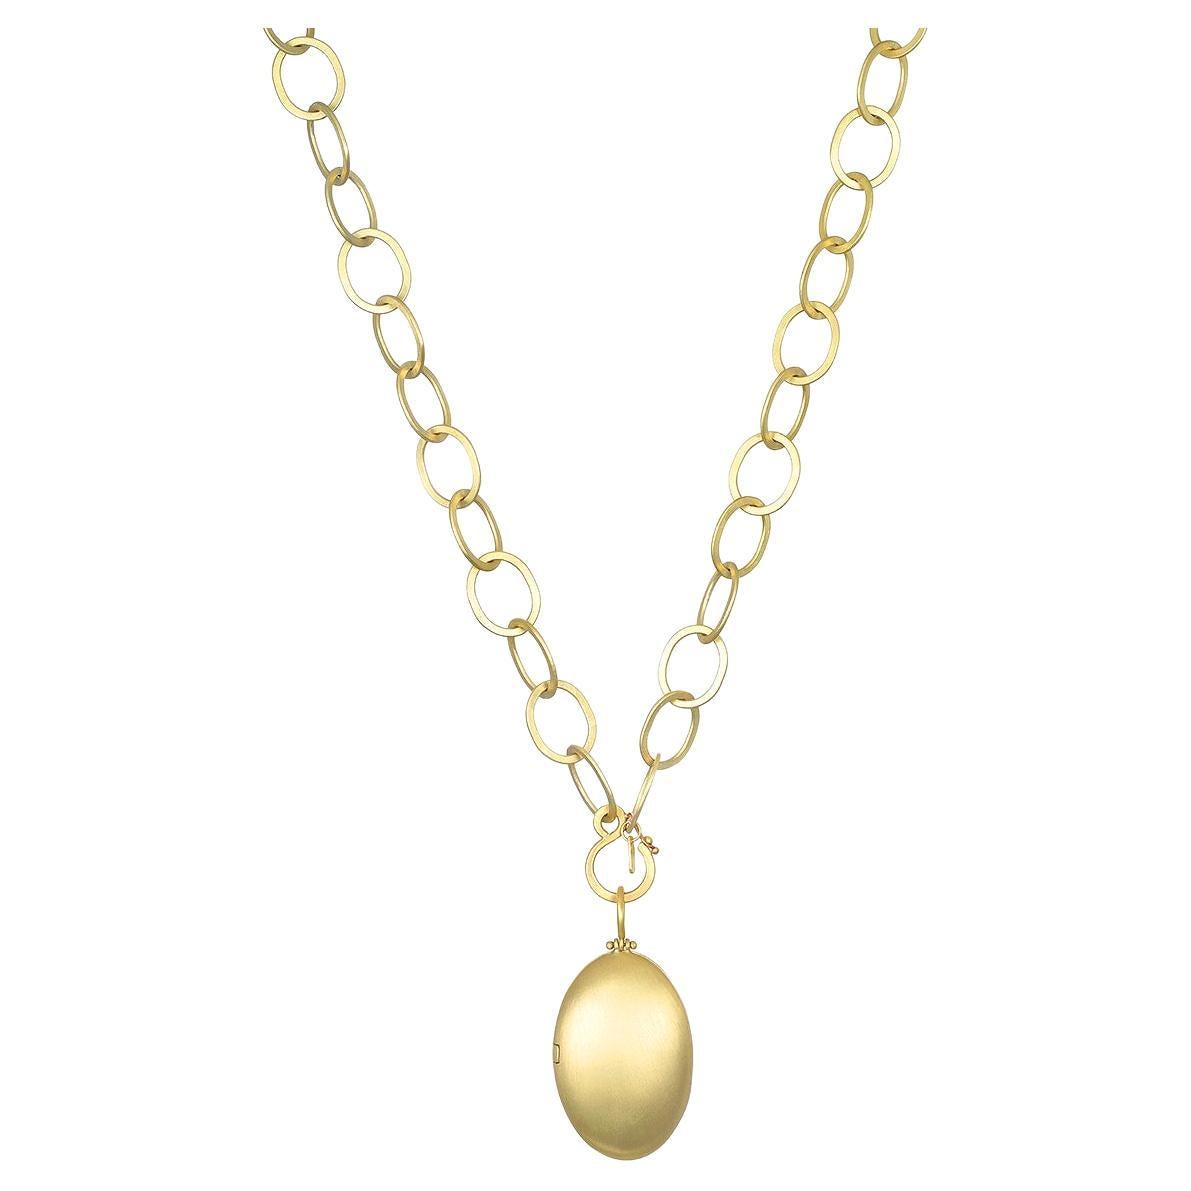 Faye Kim 18 Karat Gold Heavy Oval Planished XL Link Chain and Large Oval Locket